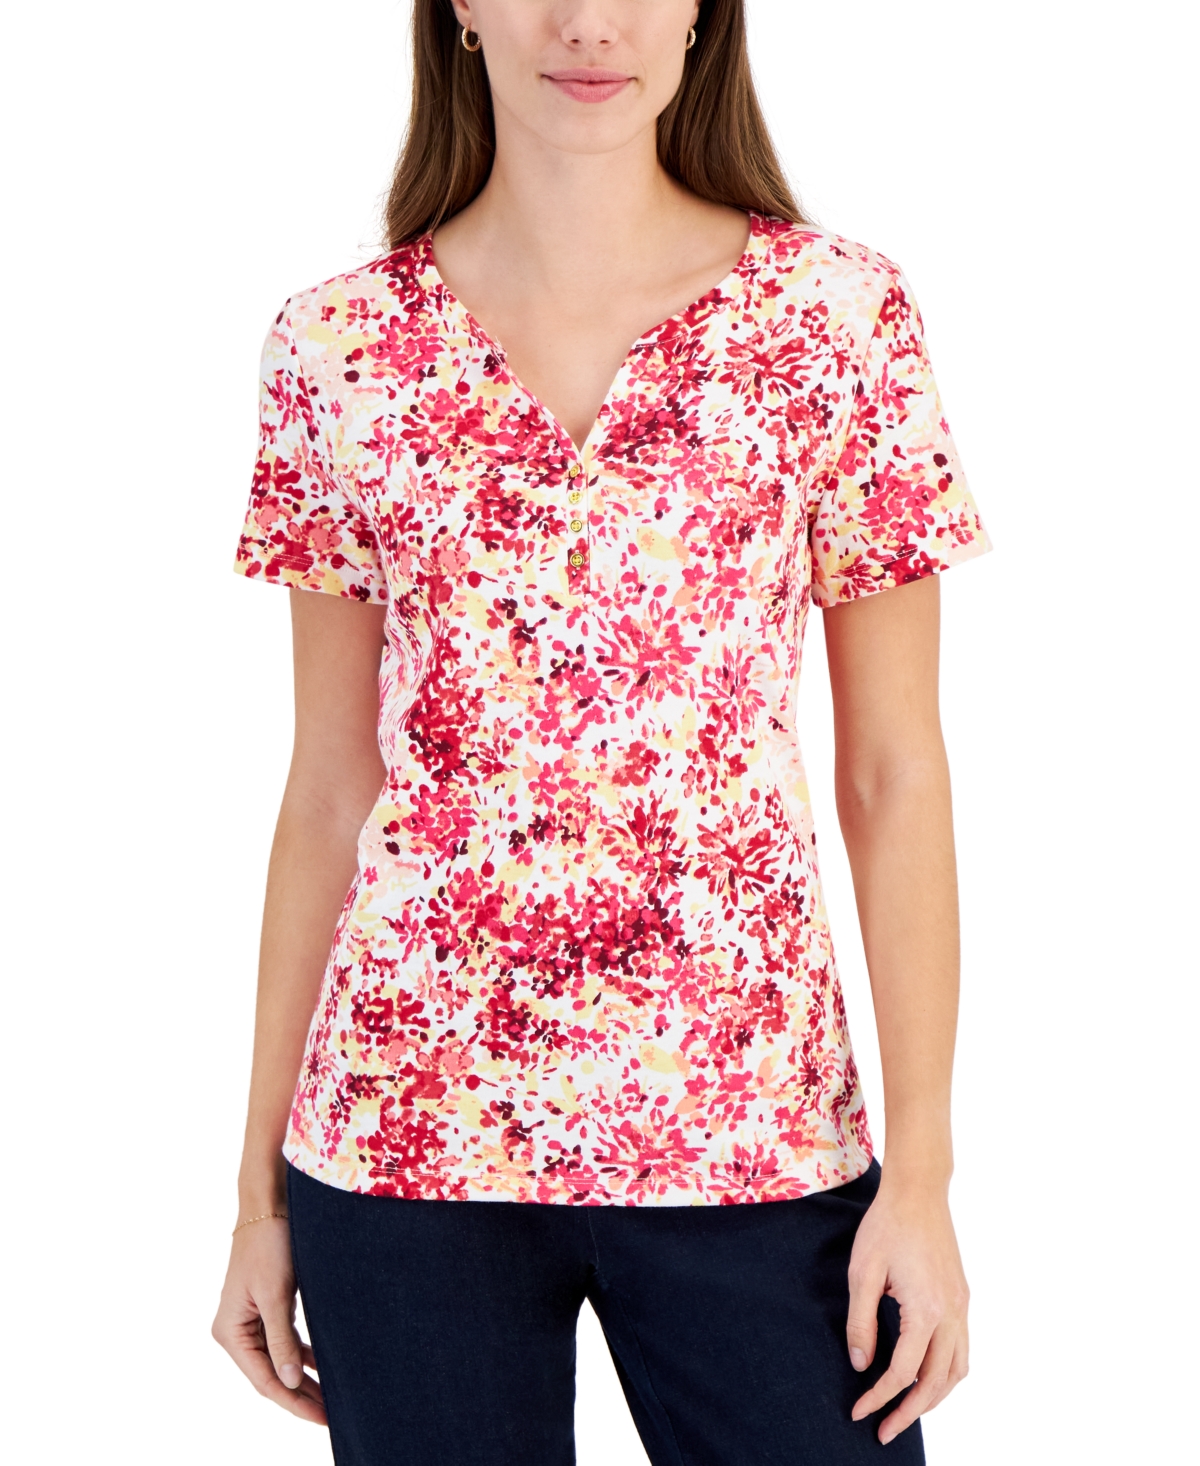 Women's Short-Sleeve Floral-Print Henley Top, Created for Macy's - Steel Rose